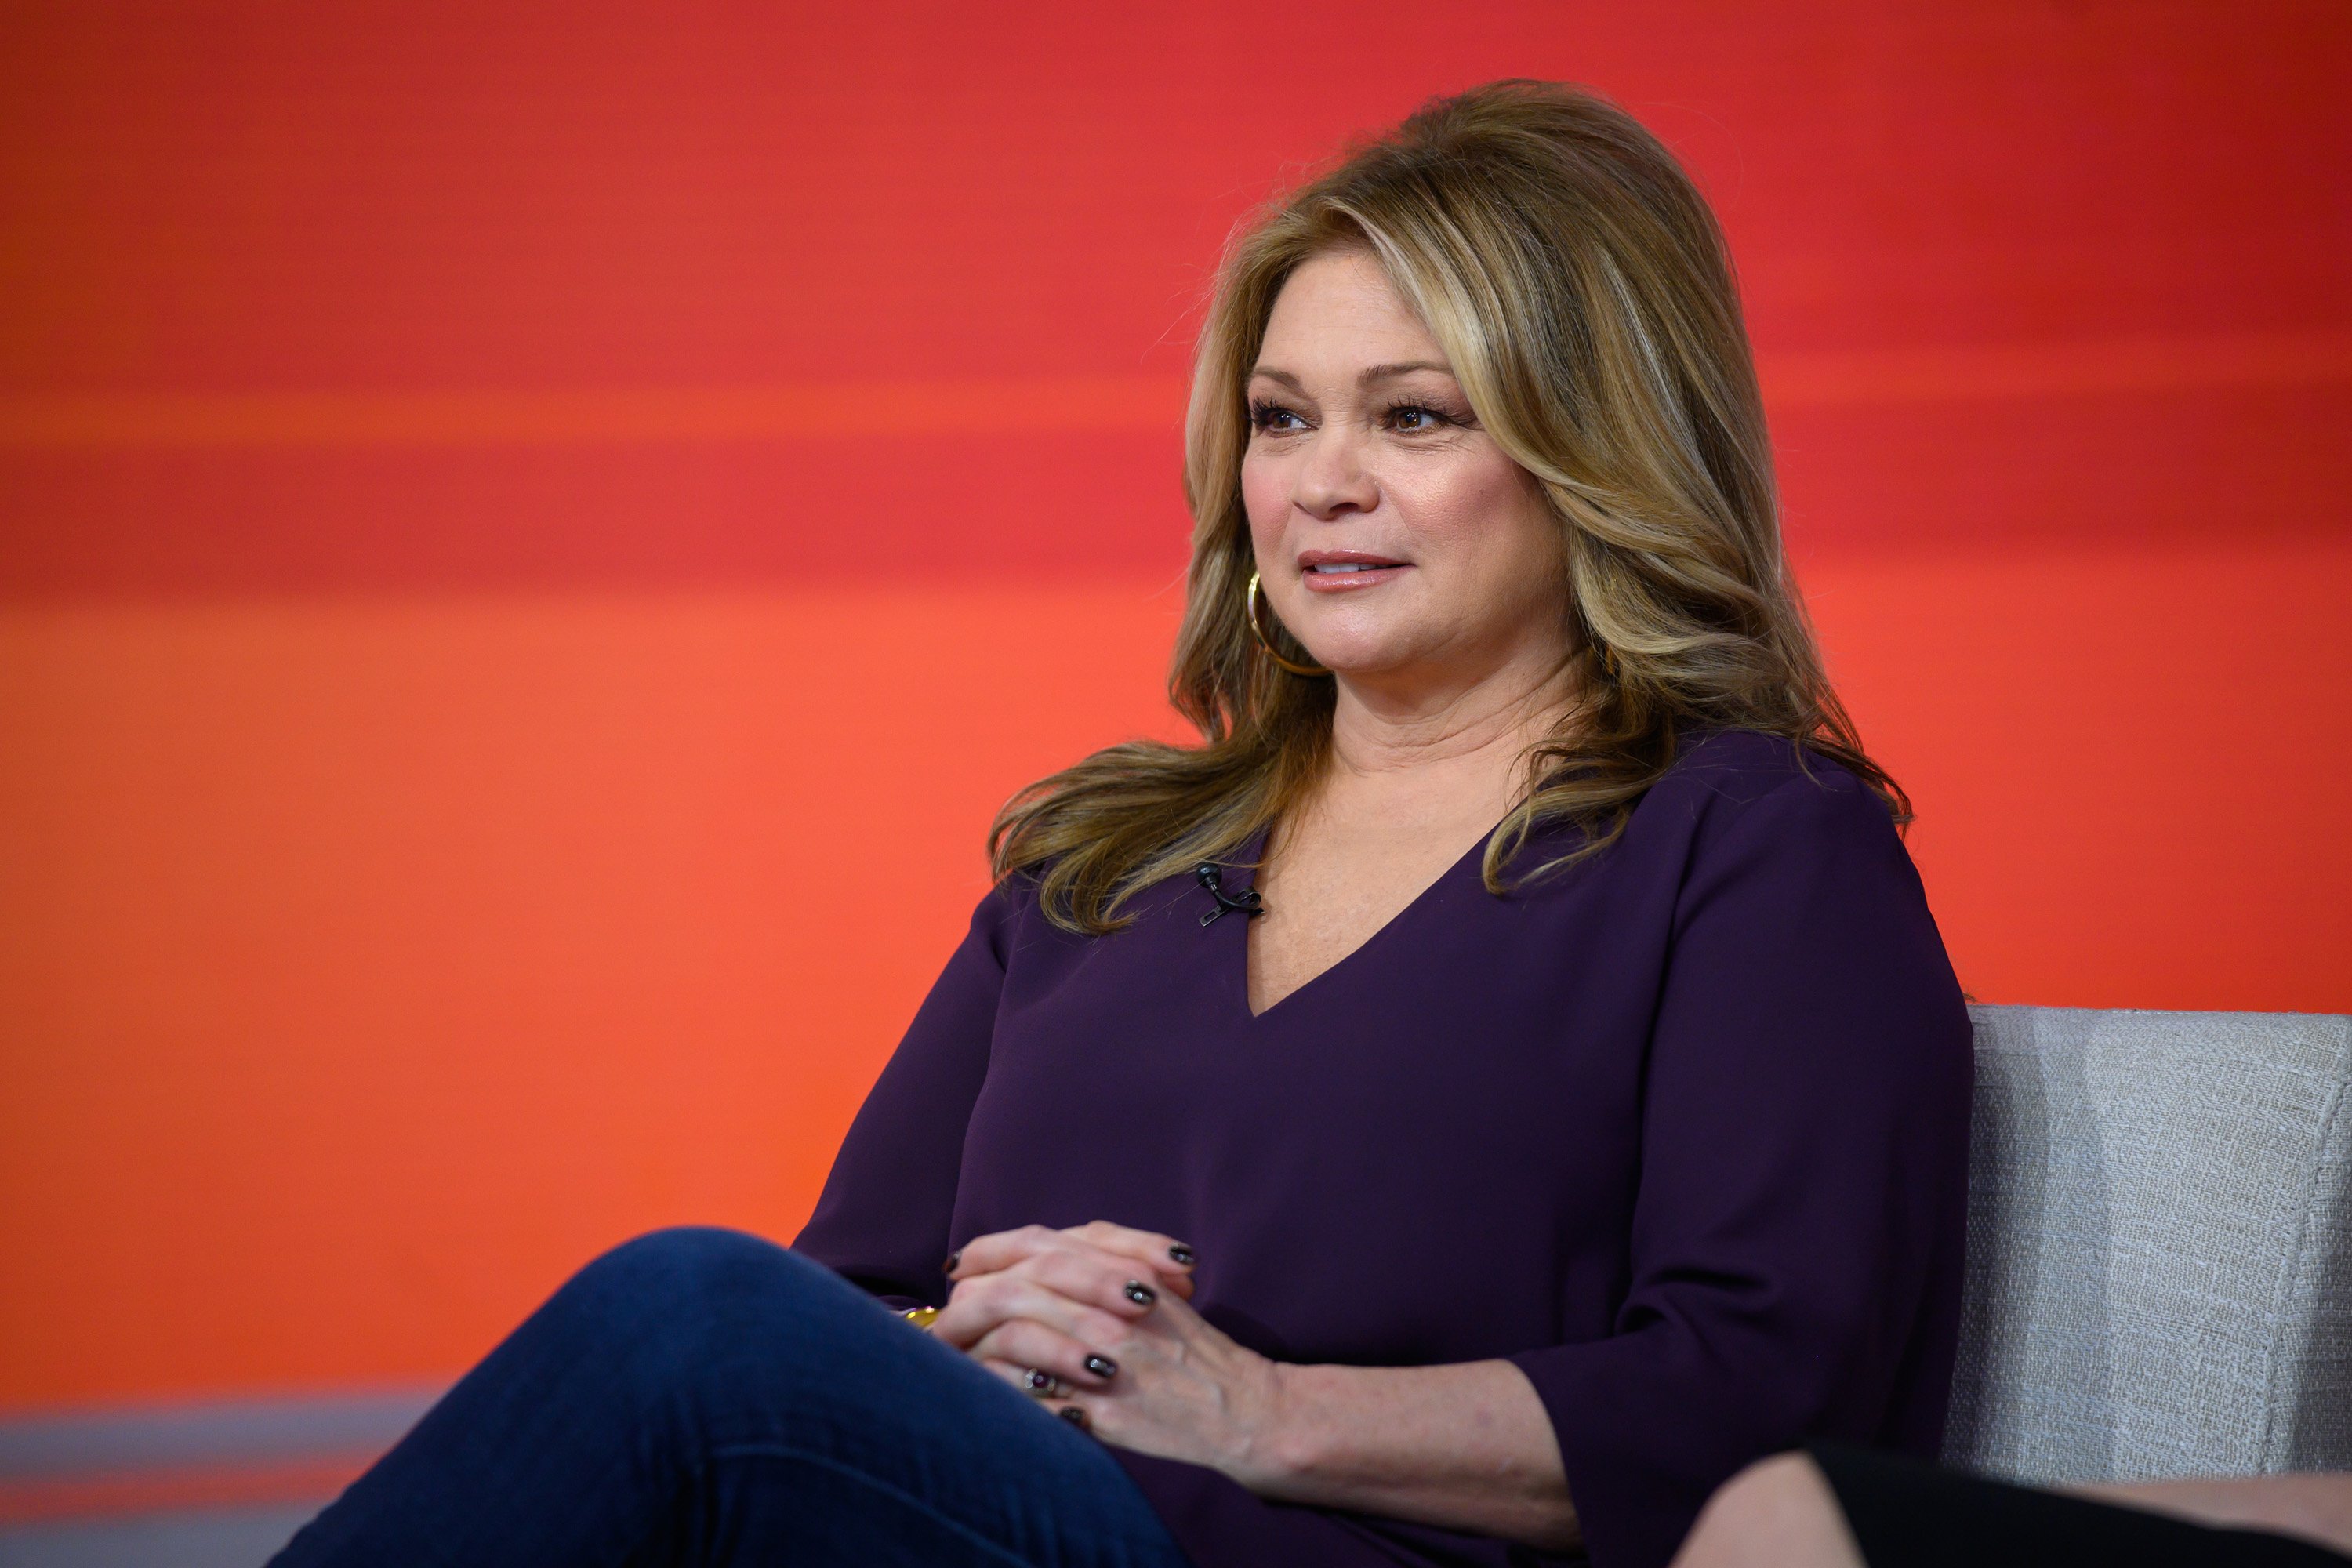 Valerie Bertinelli on the Today show in 2020. | Source: Getty Images